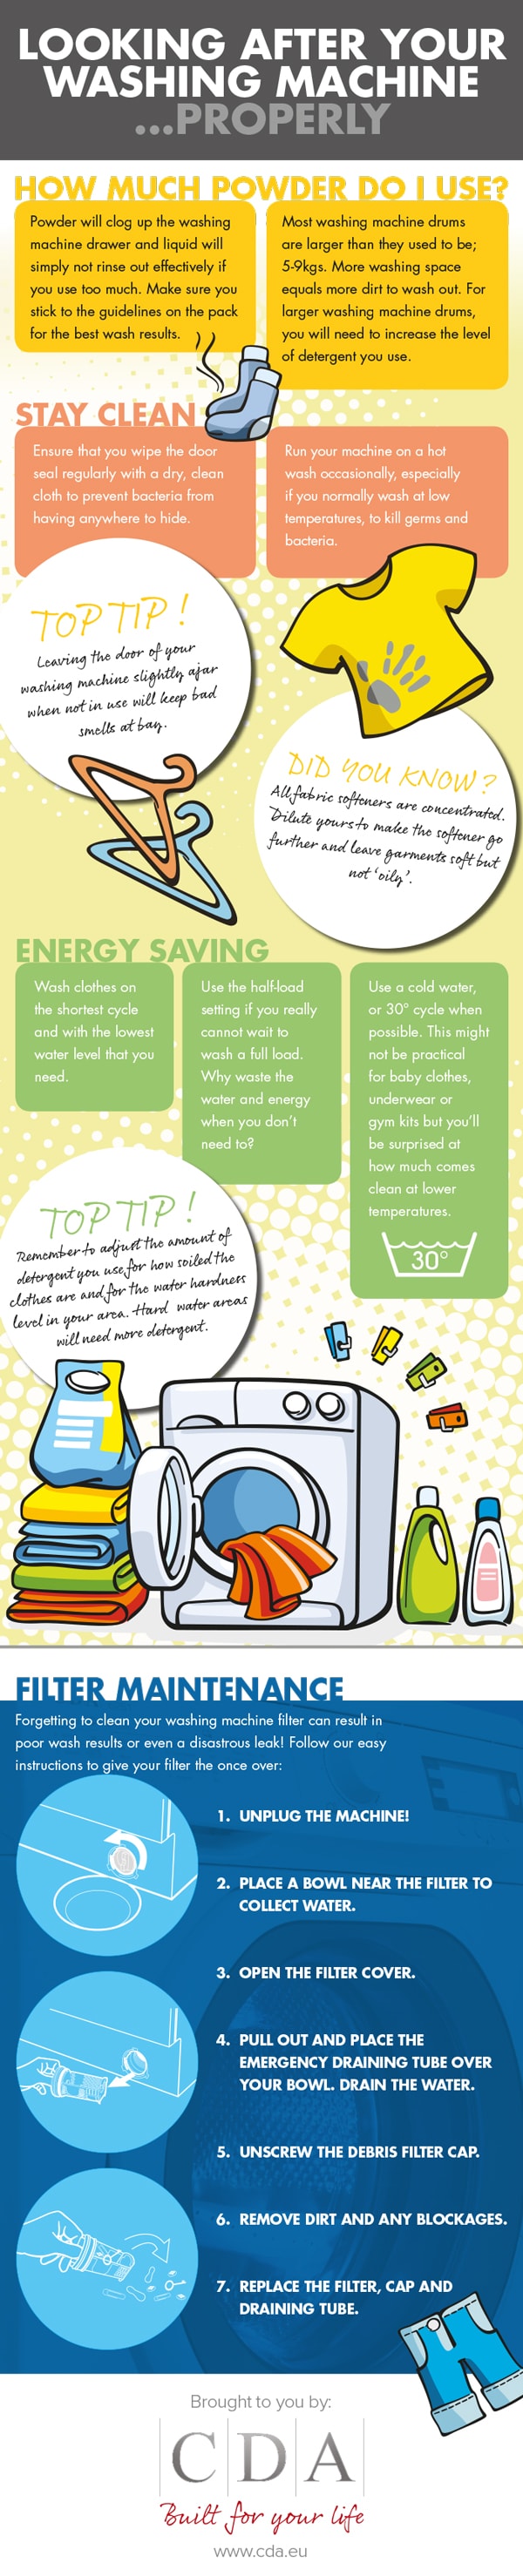 How to look after your washing machine